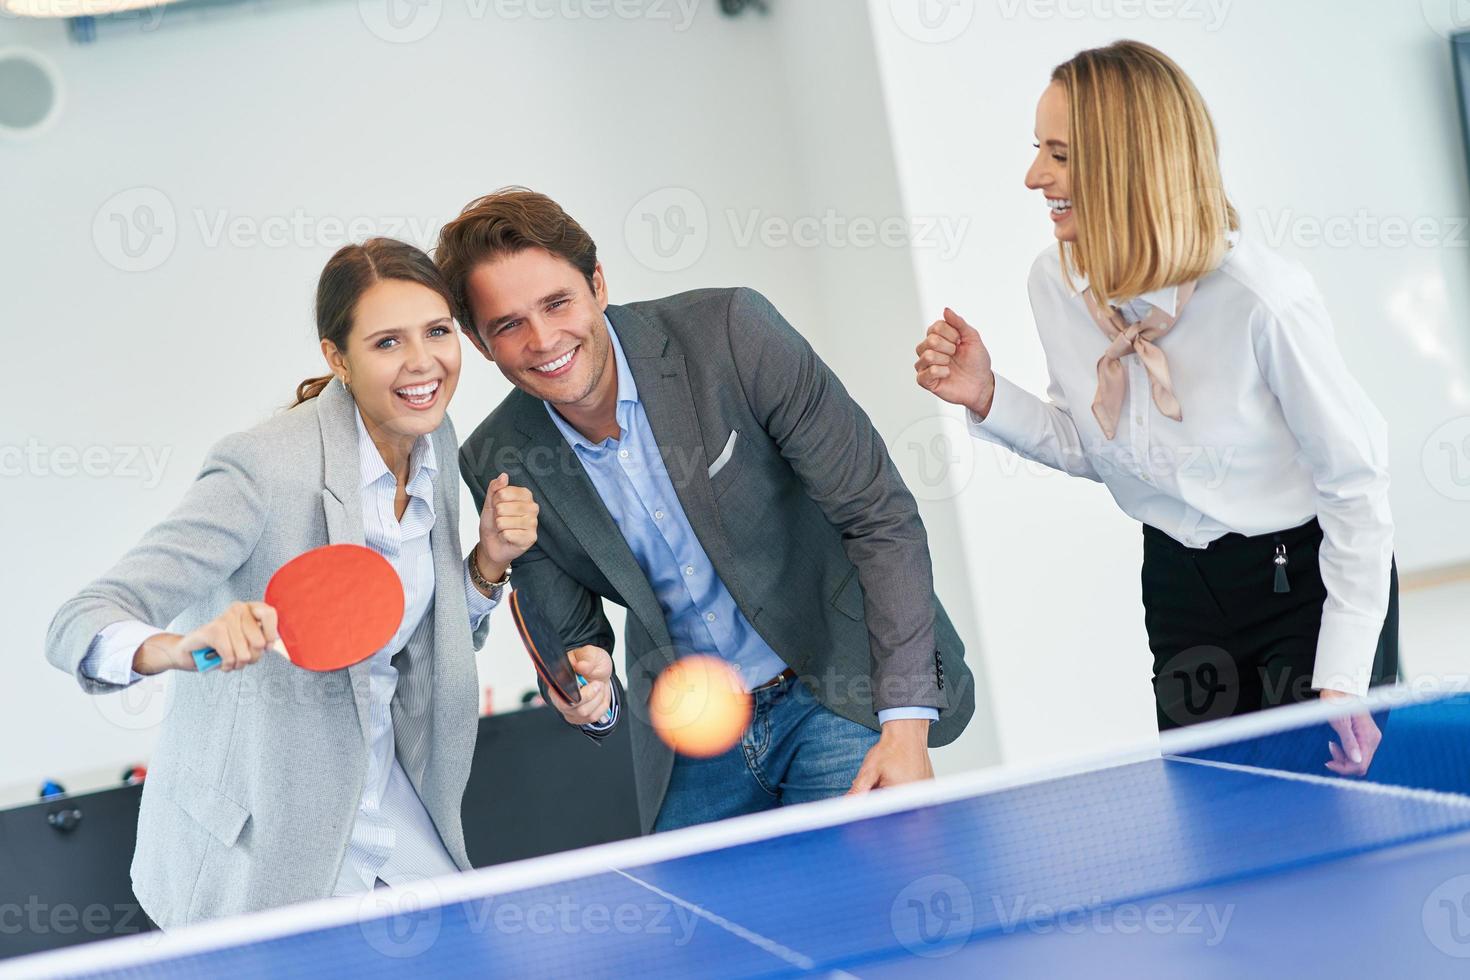 Business people relaxing in shared office space photo